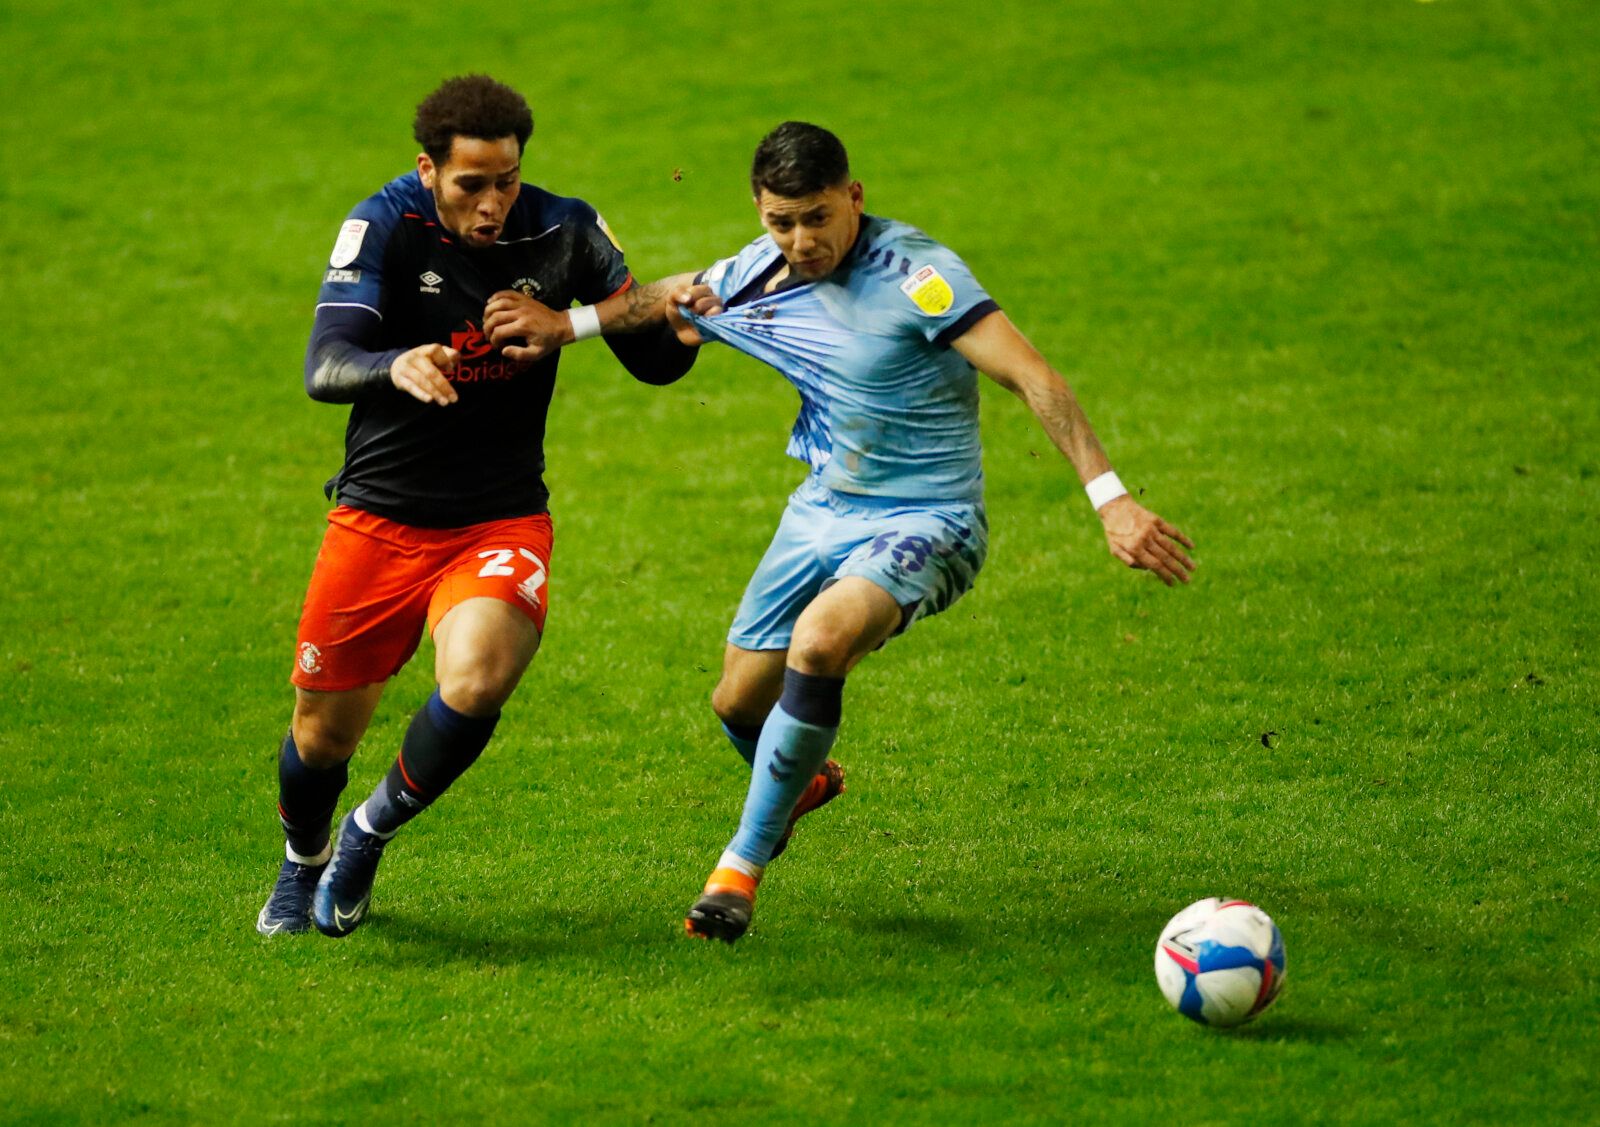 Soccer Football - Championship - Coventry City v Luton Town - St Andrew's, Birmingham, Britain - December 8, 2020 Luton Town's Sam Nombe in action with Coventry City's Gustavo Hamer Action Images/Andrew Boyers EDITORIAL USE ONLY. No use with unauthorized audio, video, data, fixture lists, club/league logos or 'live' services. Online in-match use limited to 75 images, no video emulation. No use in betting, games or single club /league/player publications.  Please contact your account representati